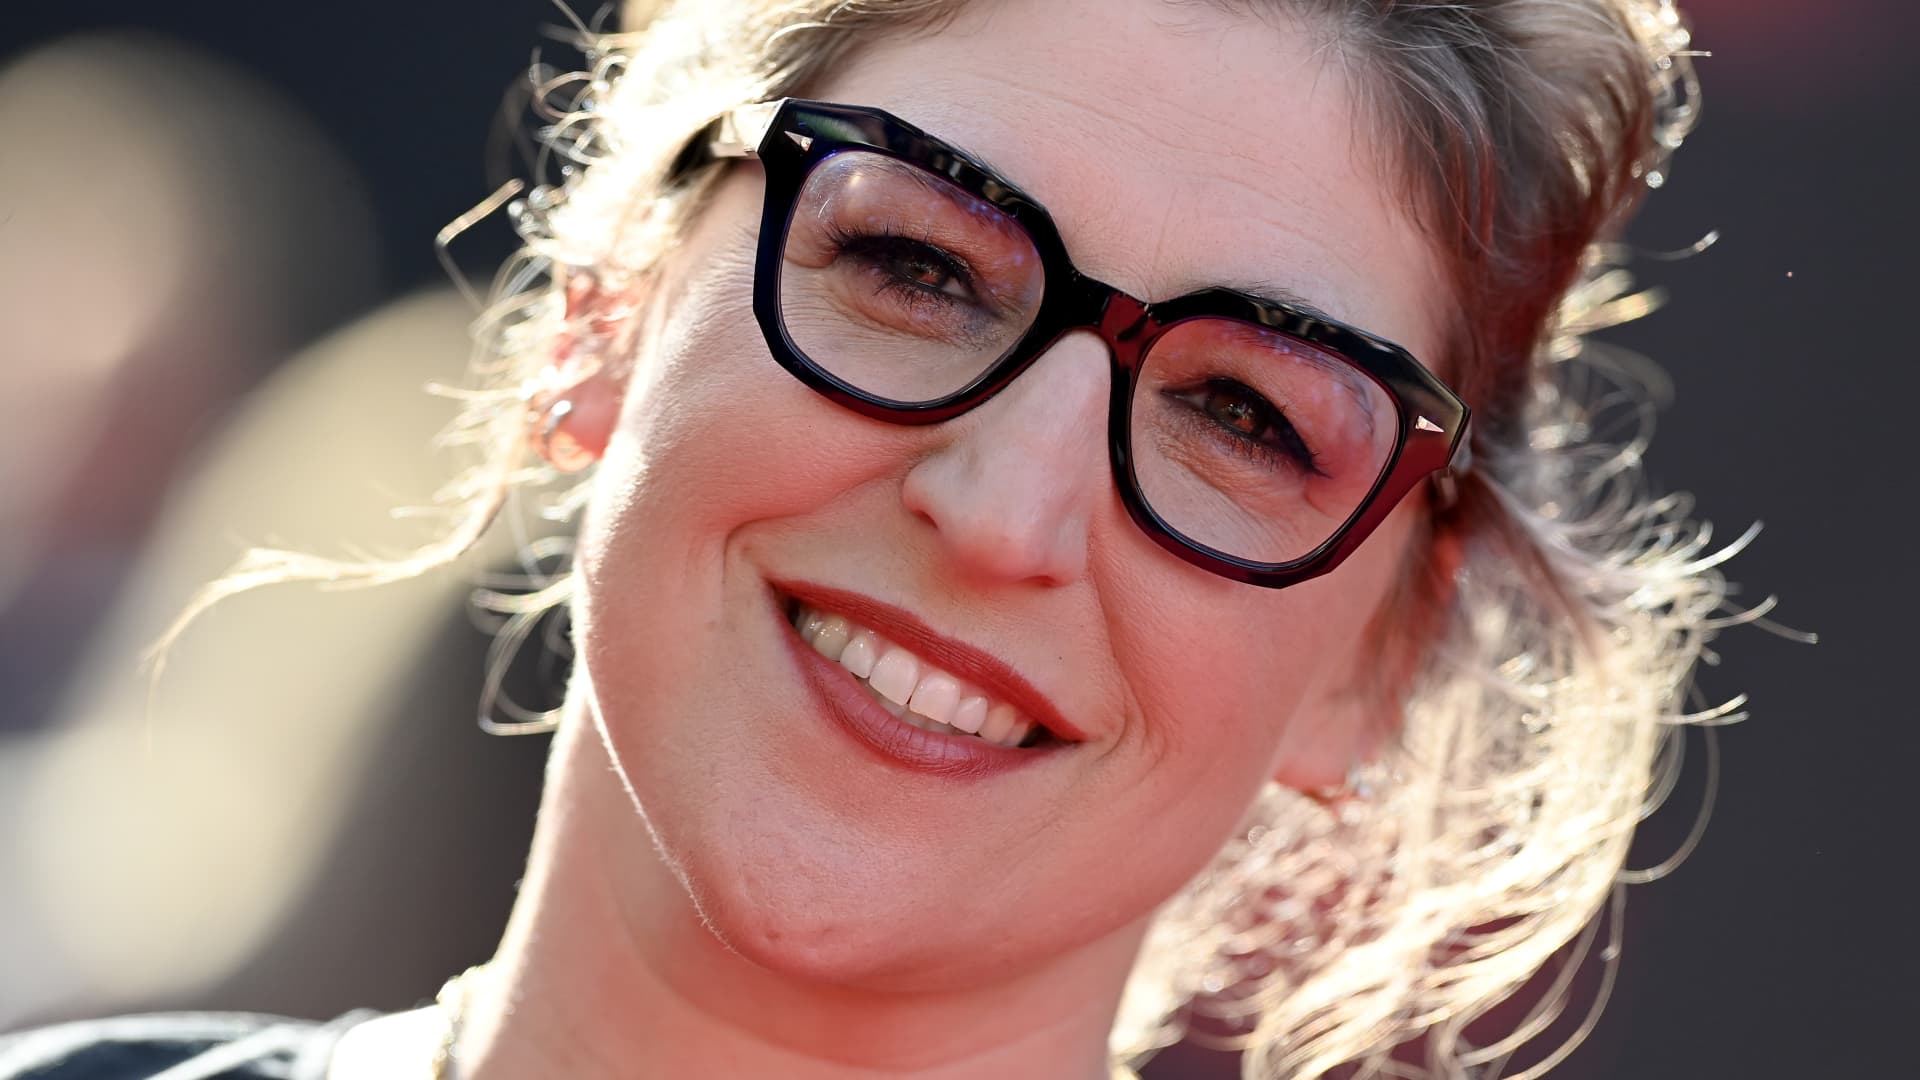 ‘Jeopardy!’ locks in hosting deals for Mayim Bialik and Ken Jennings